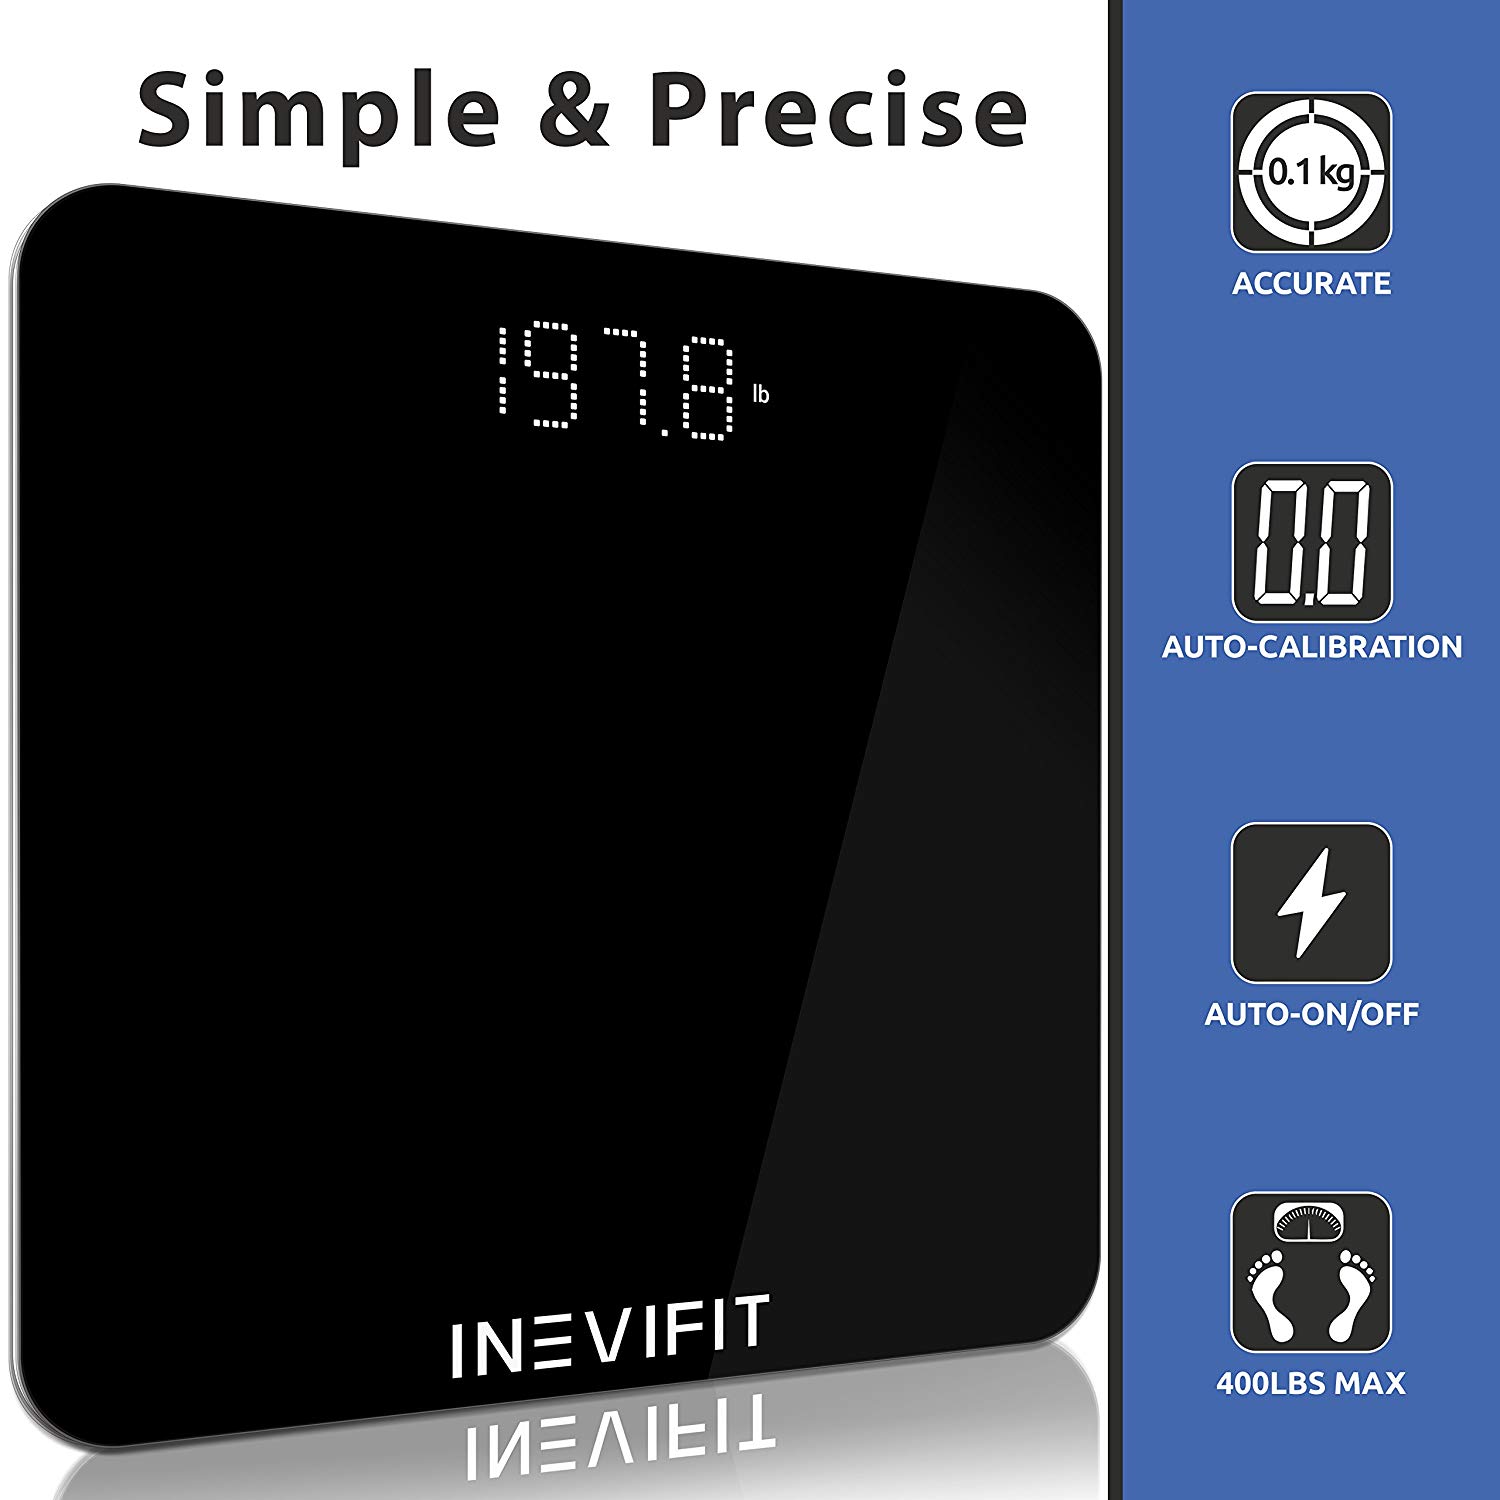 INEVIFIT Bathroom Scale, Highly Accurate Digital Bathroom Body Scale,  Measures Weight for Multiple …